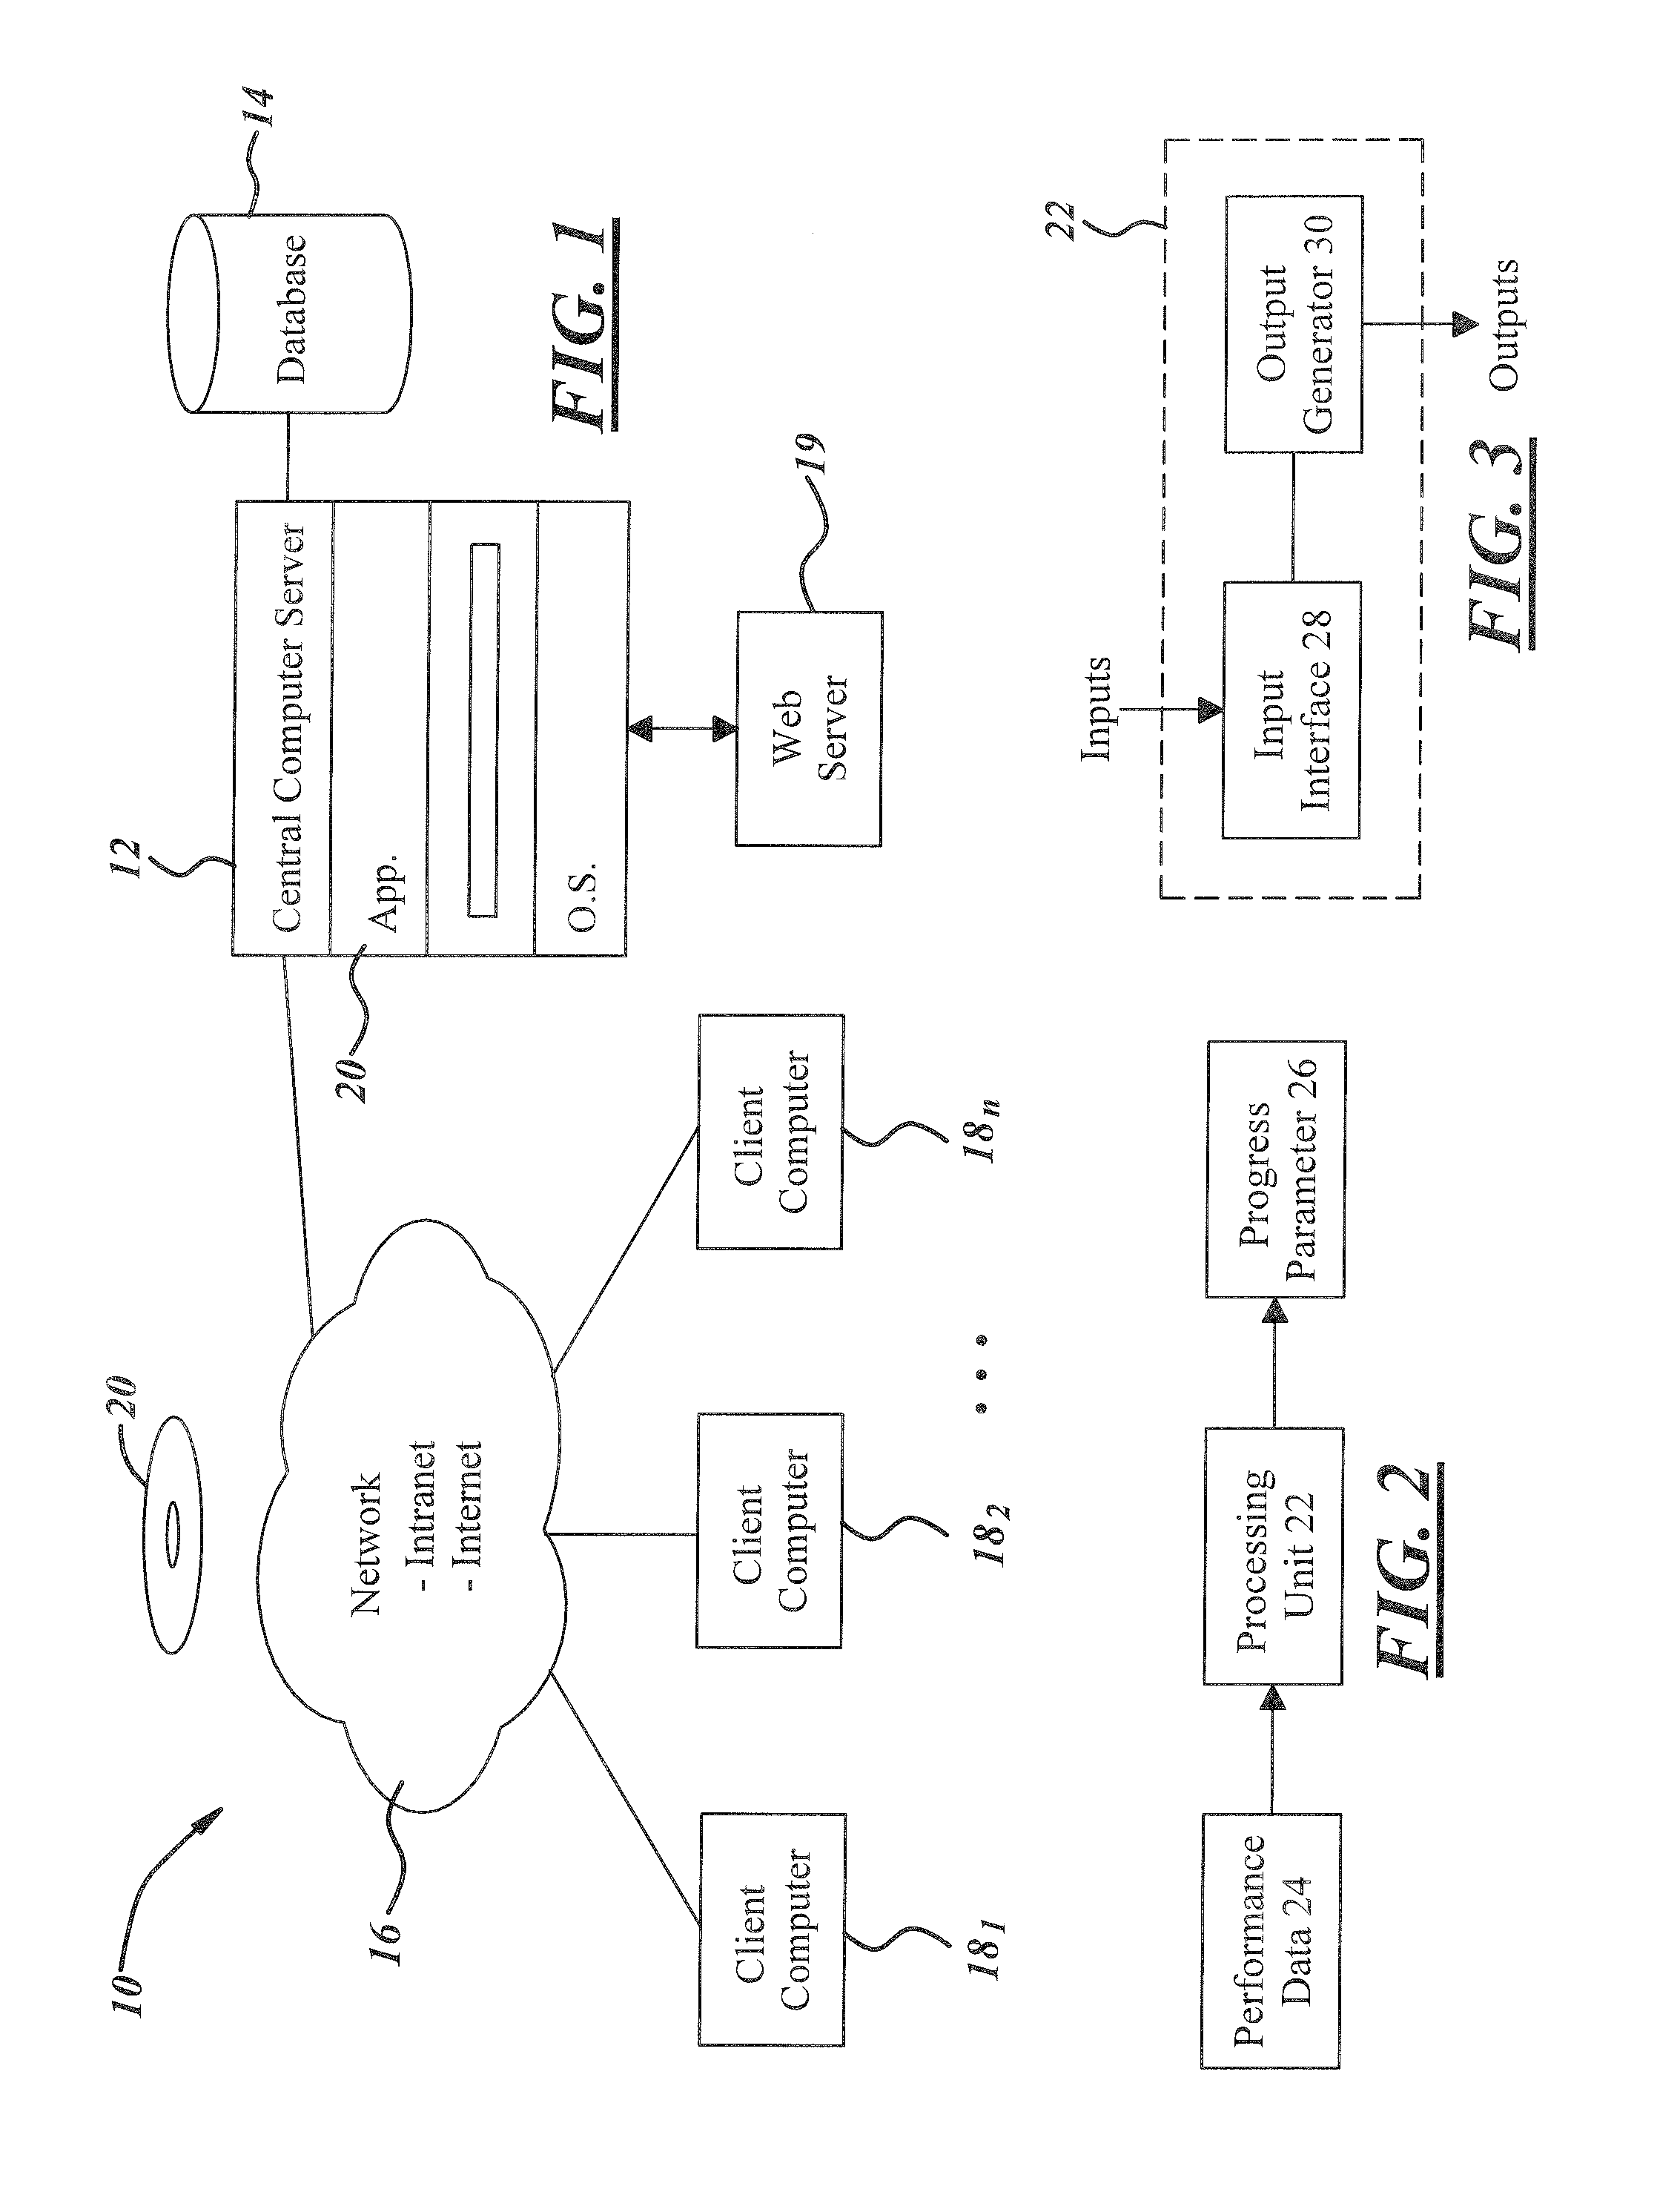 System and method for processing performance data